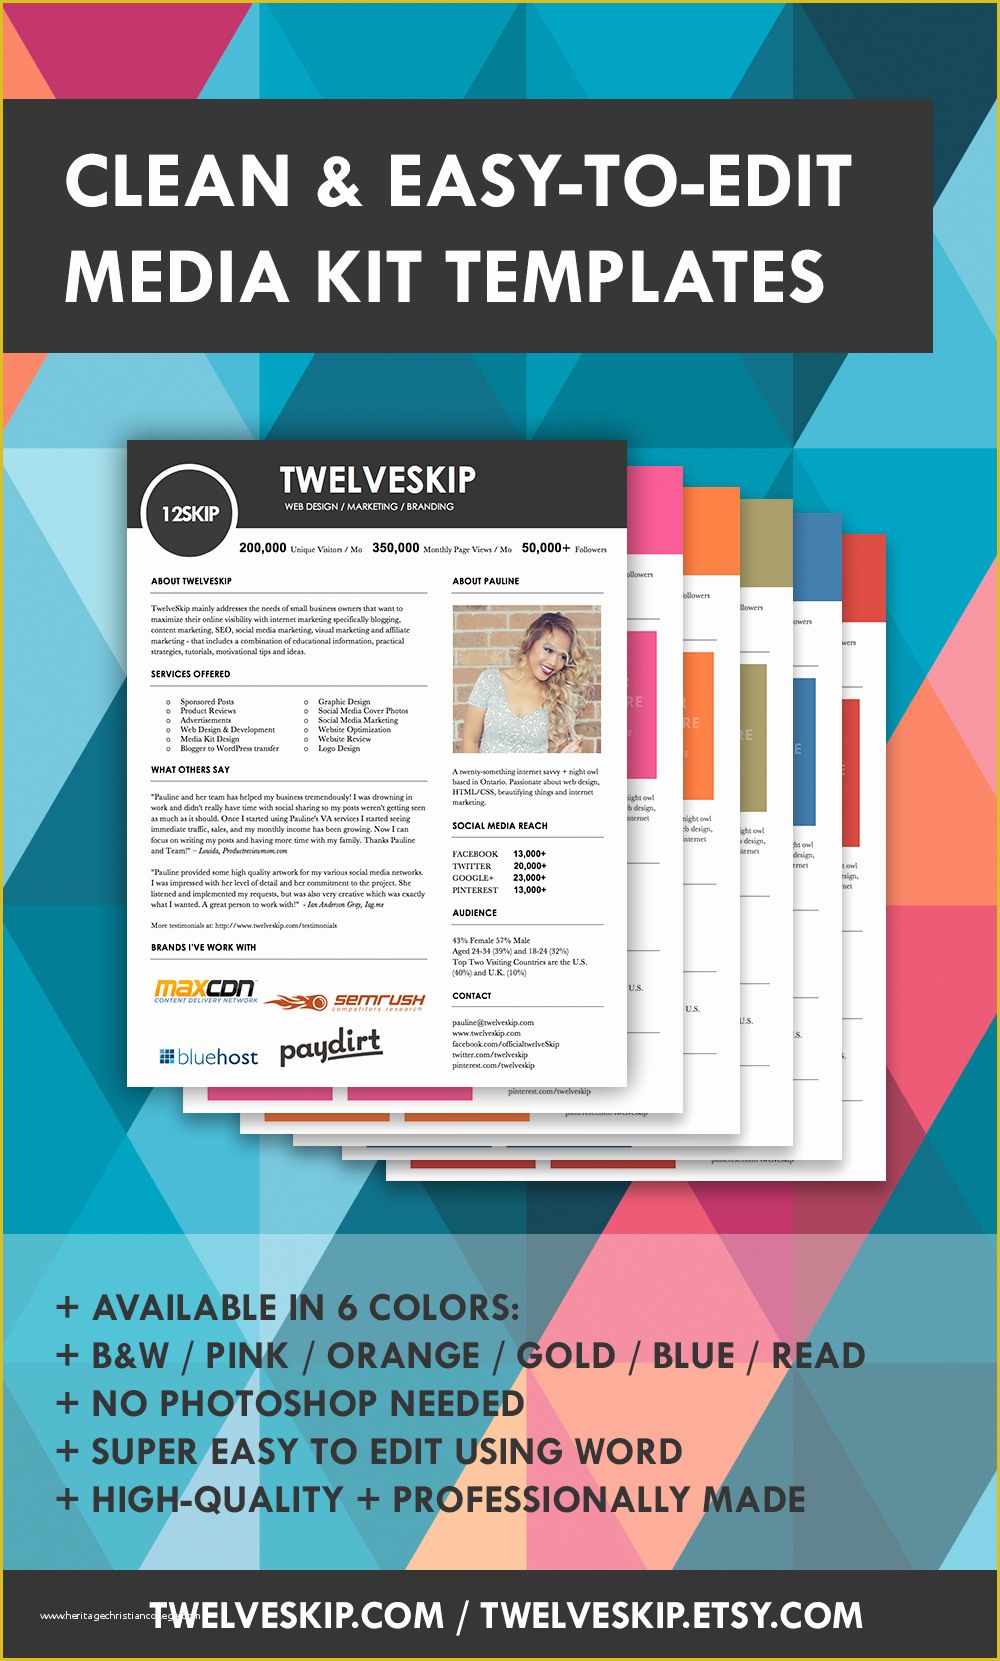 Free Media Kit Template Of Media Kit Templates Diy the Pin to One today